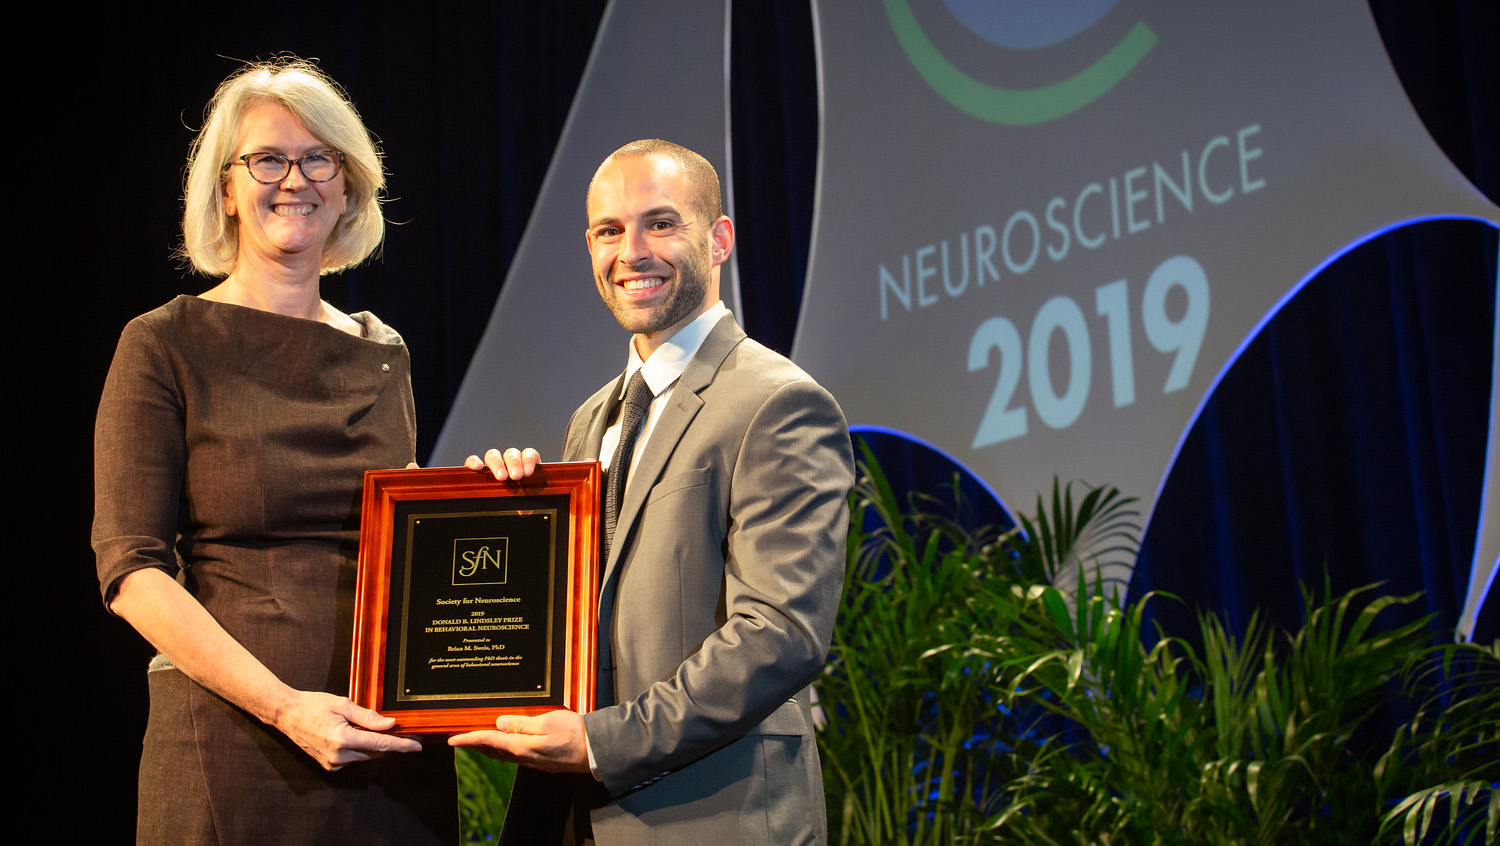 Brian M. Sweis, PhD (right), of the University of Minnesota, accepts the Donald B. Lindsley Prize in Behavioral Neuroscience.